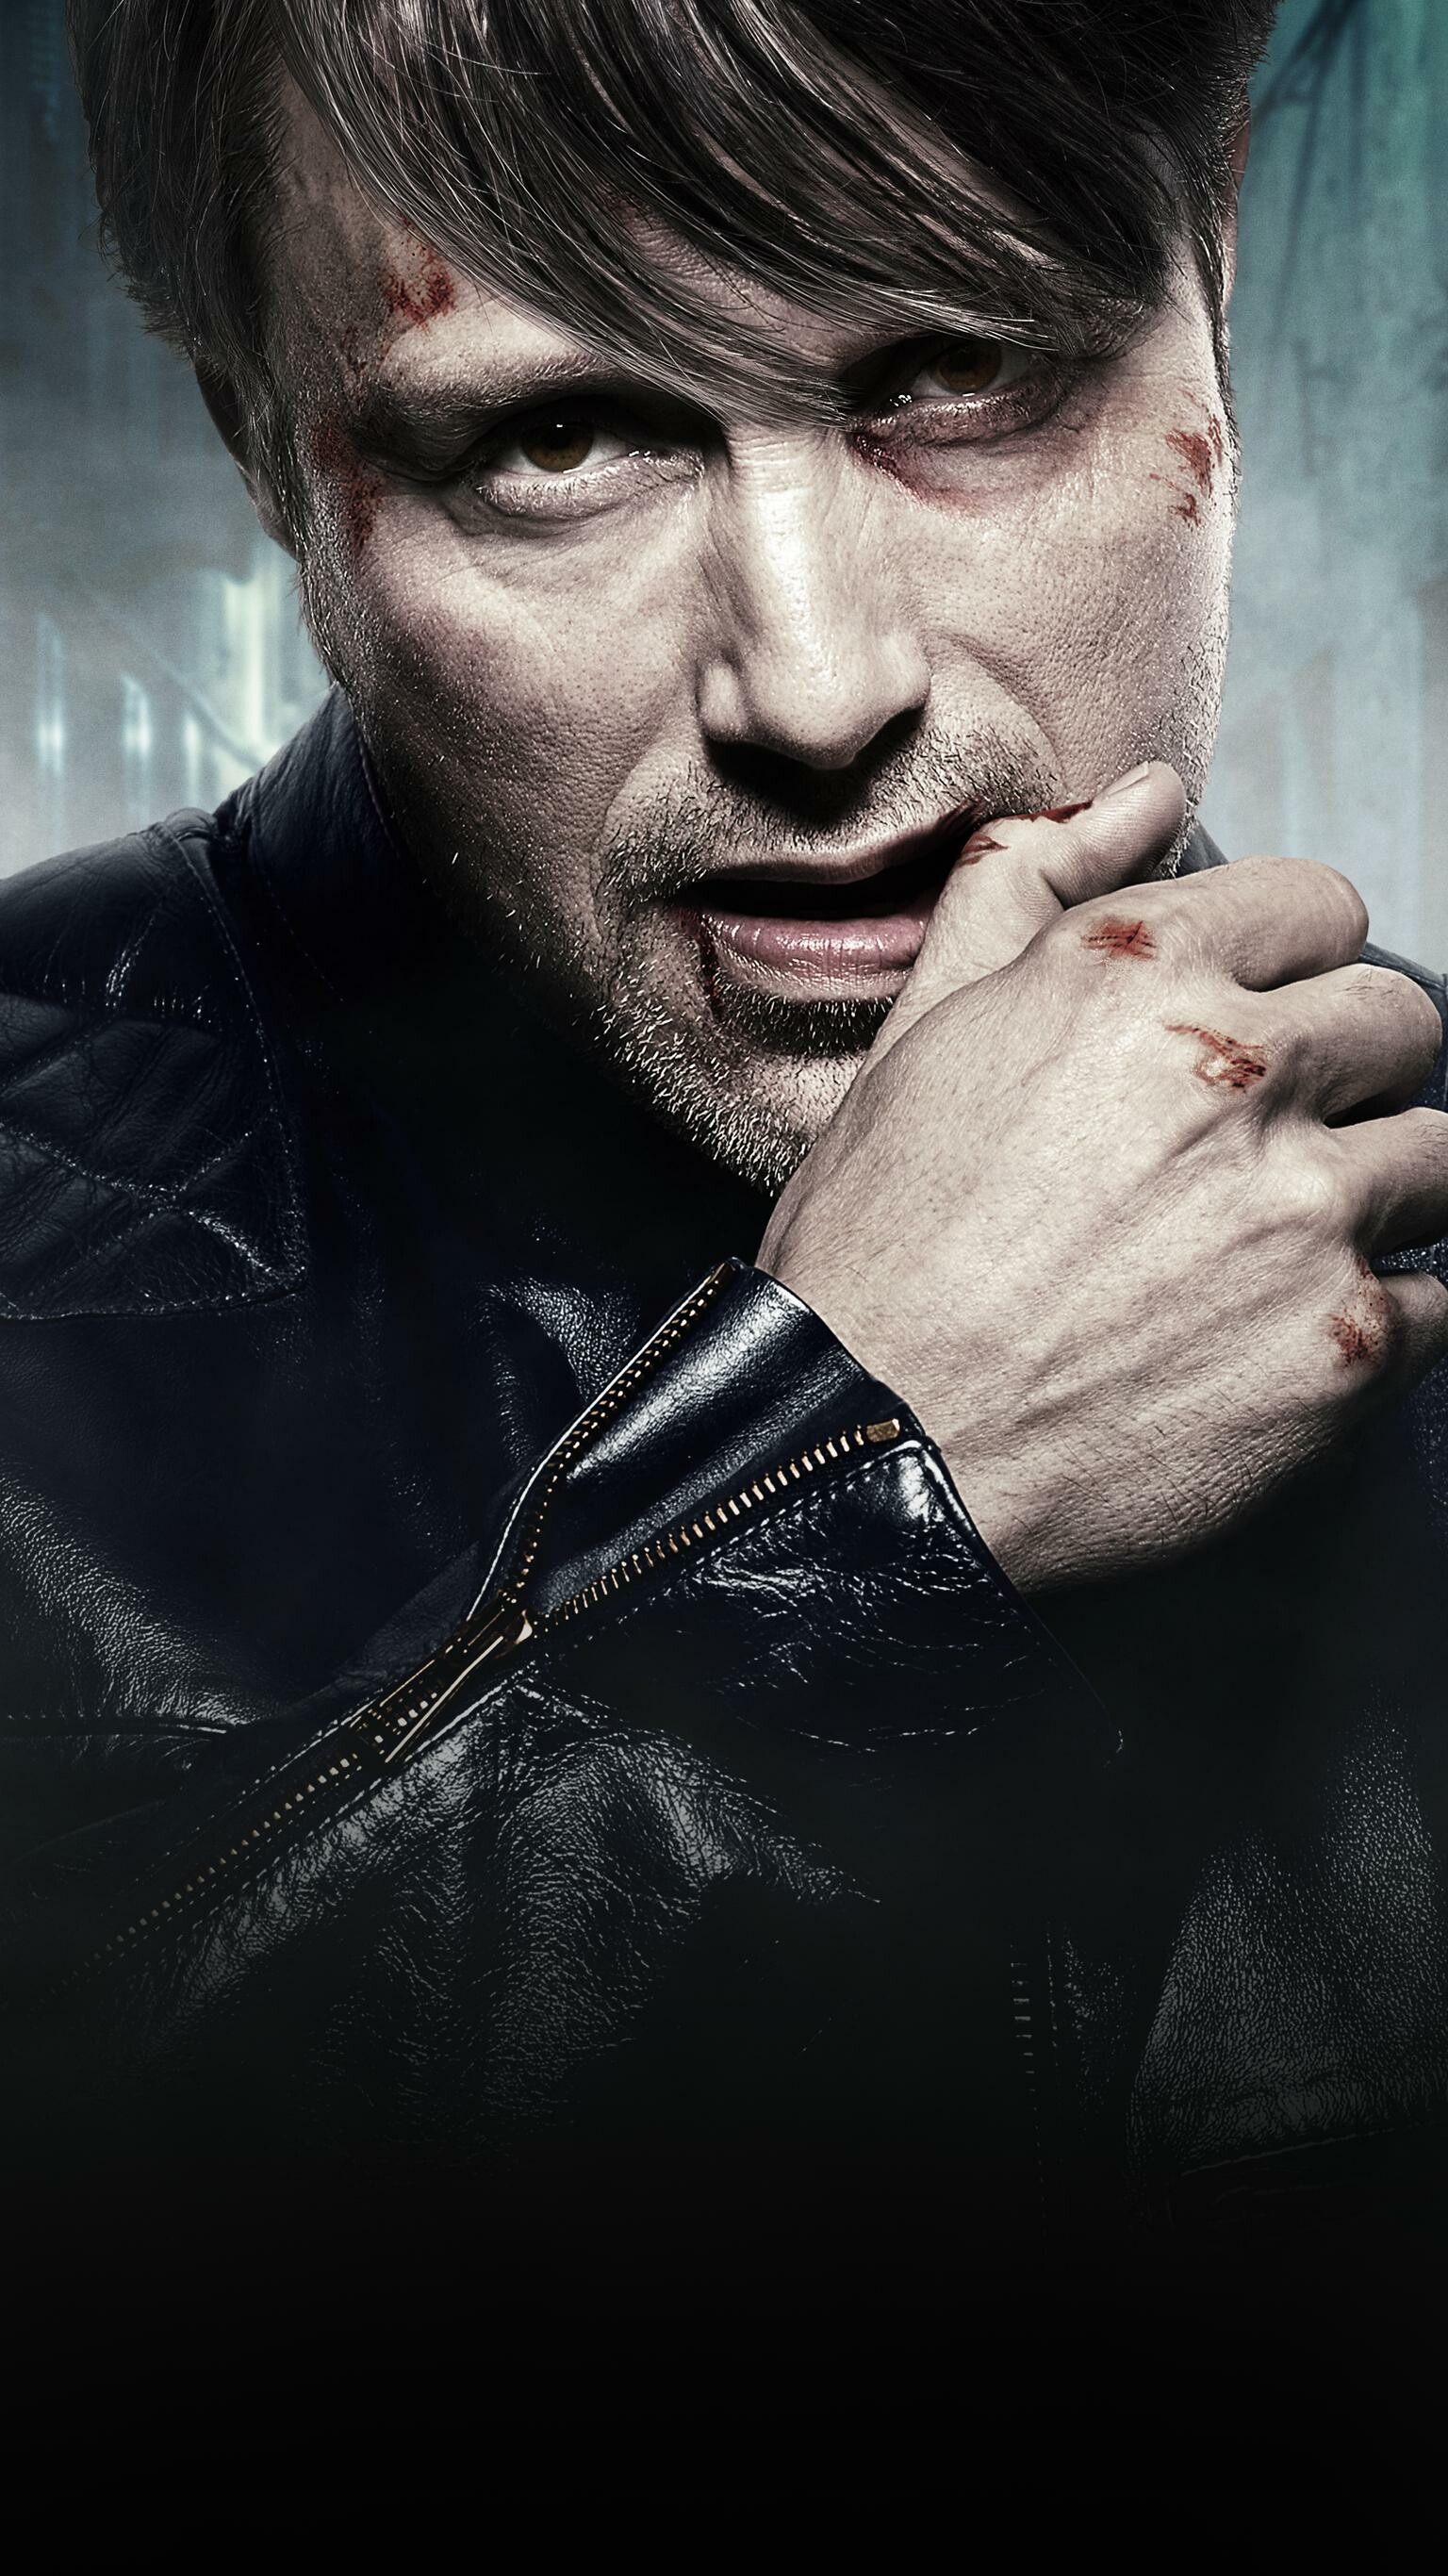 Hannibal (TV Series): Dr. Lecter, The show premiered on NBC on April 4, 2013. 1540x2740 HD Wallpaper.